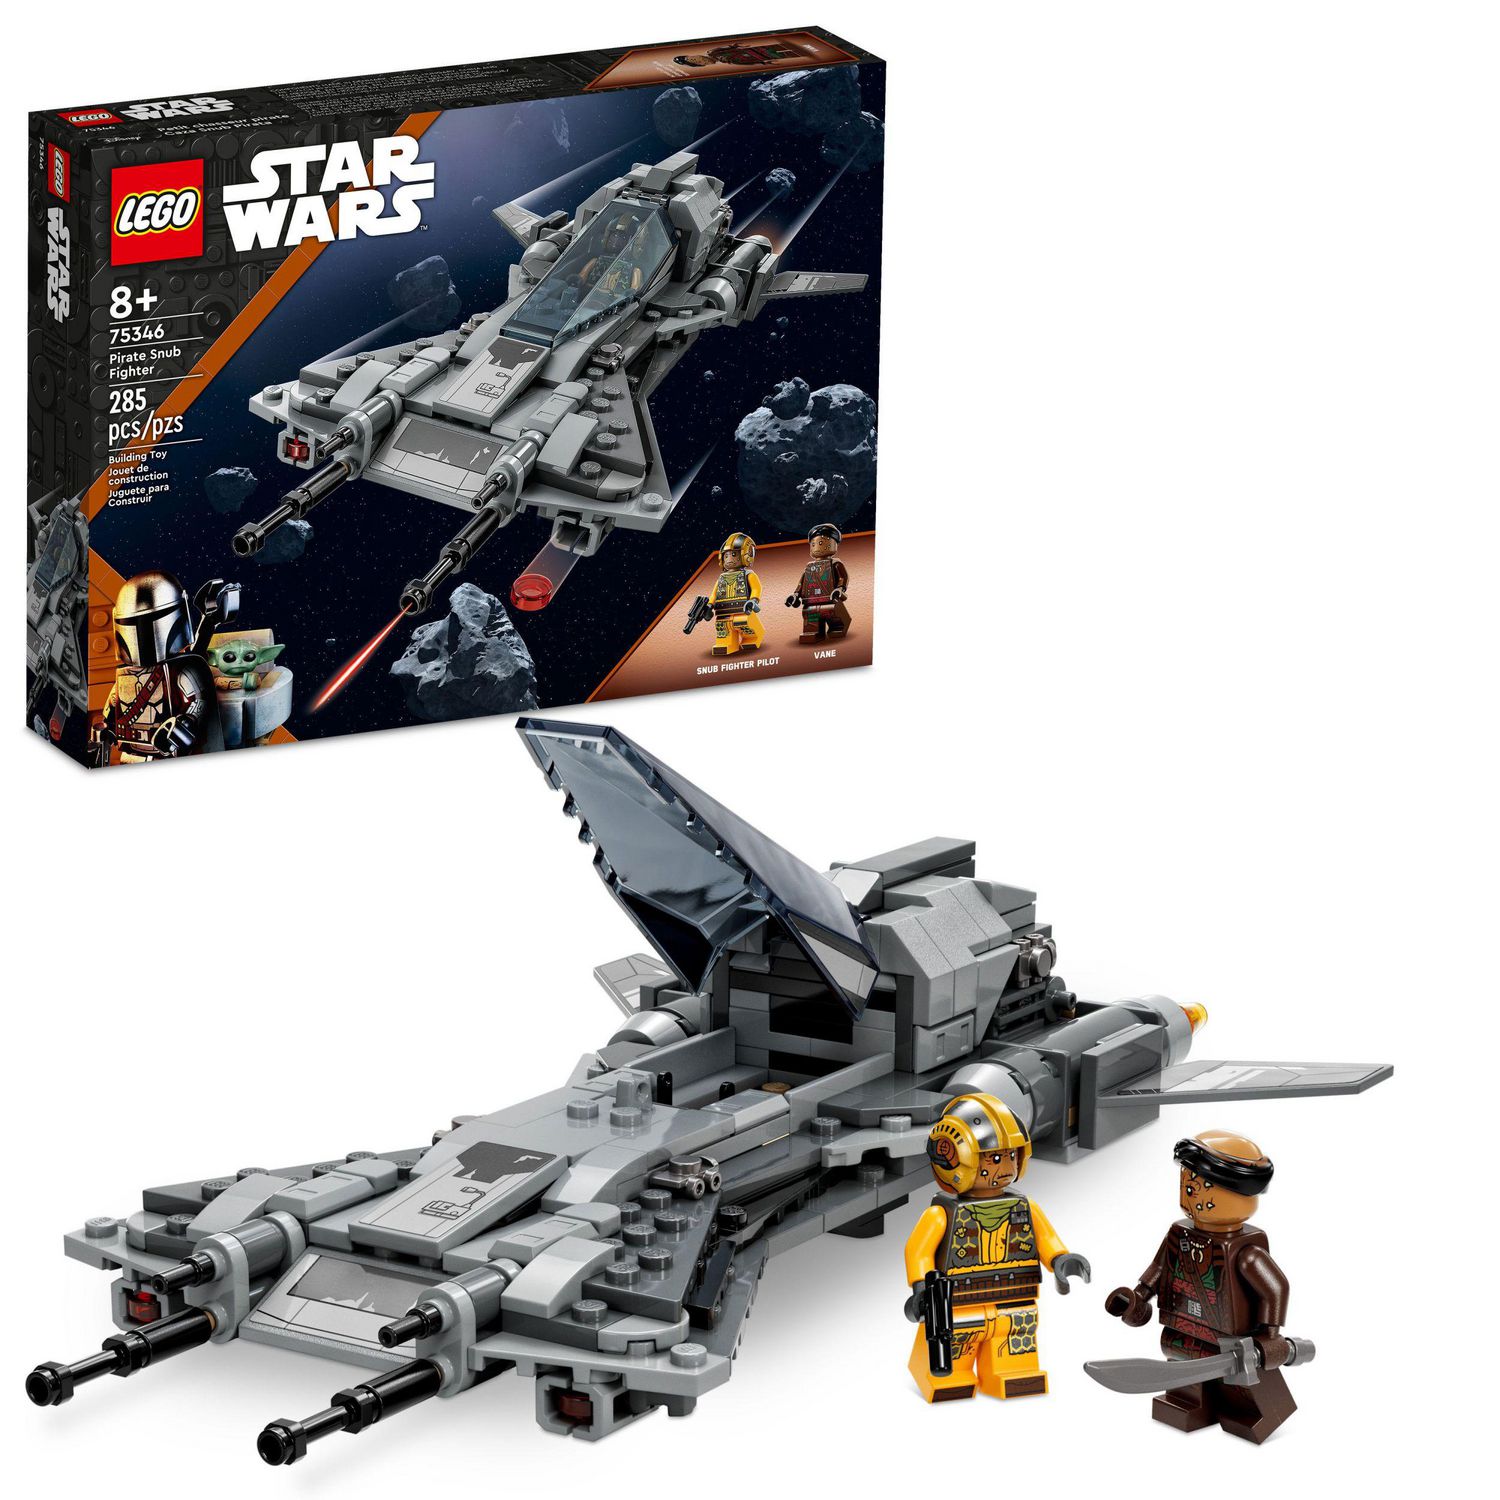 Fighter　Gift　285　Includes　the　Mandalorian　Wars　Ages　for　Wars　Boys,　Pirate　4th　LEGO　Pieces,　75346　May　Star　8+　Snub　Star